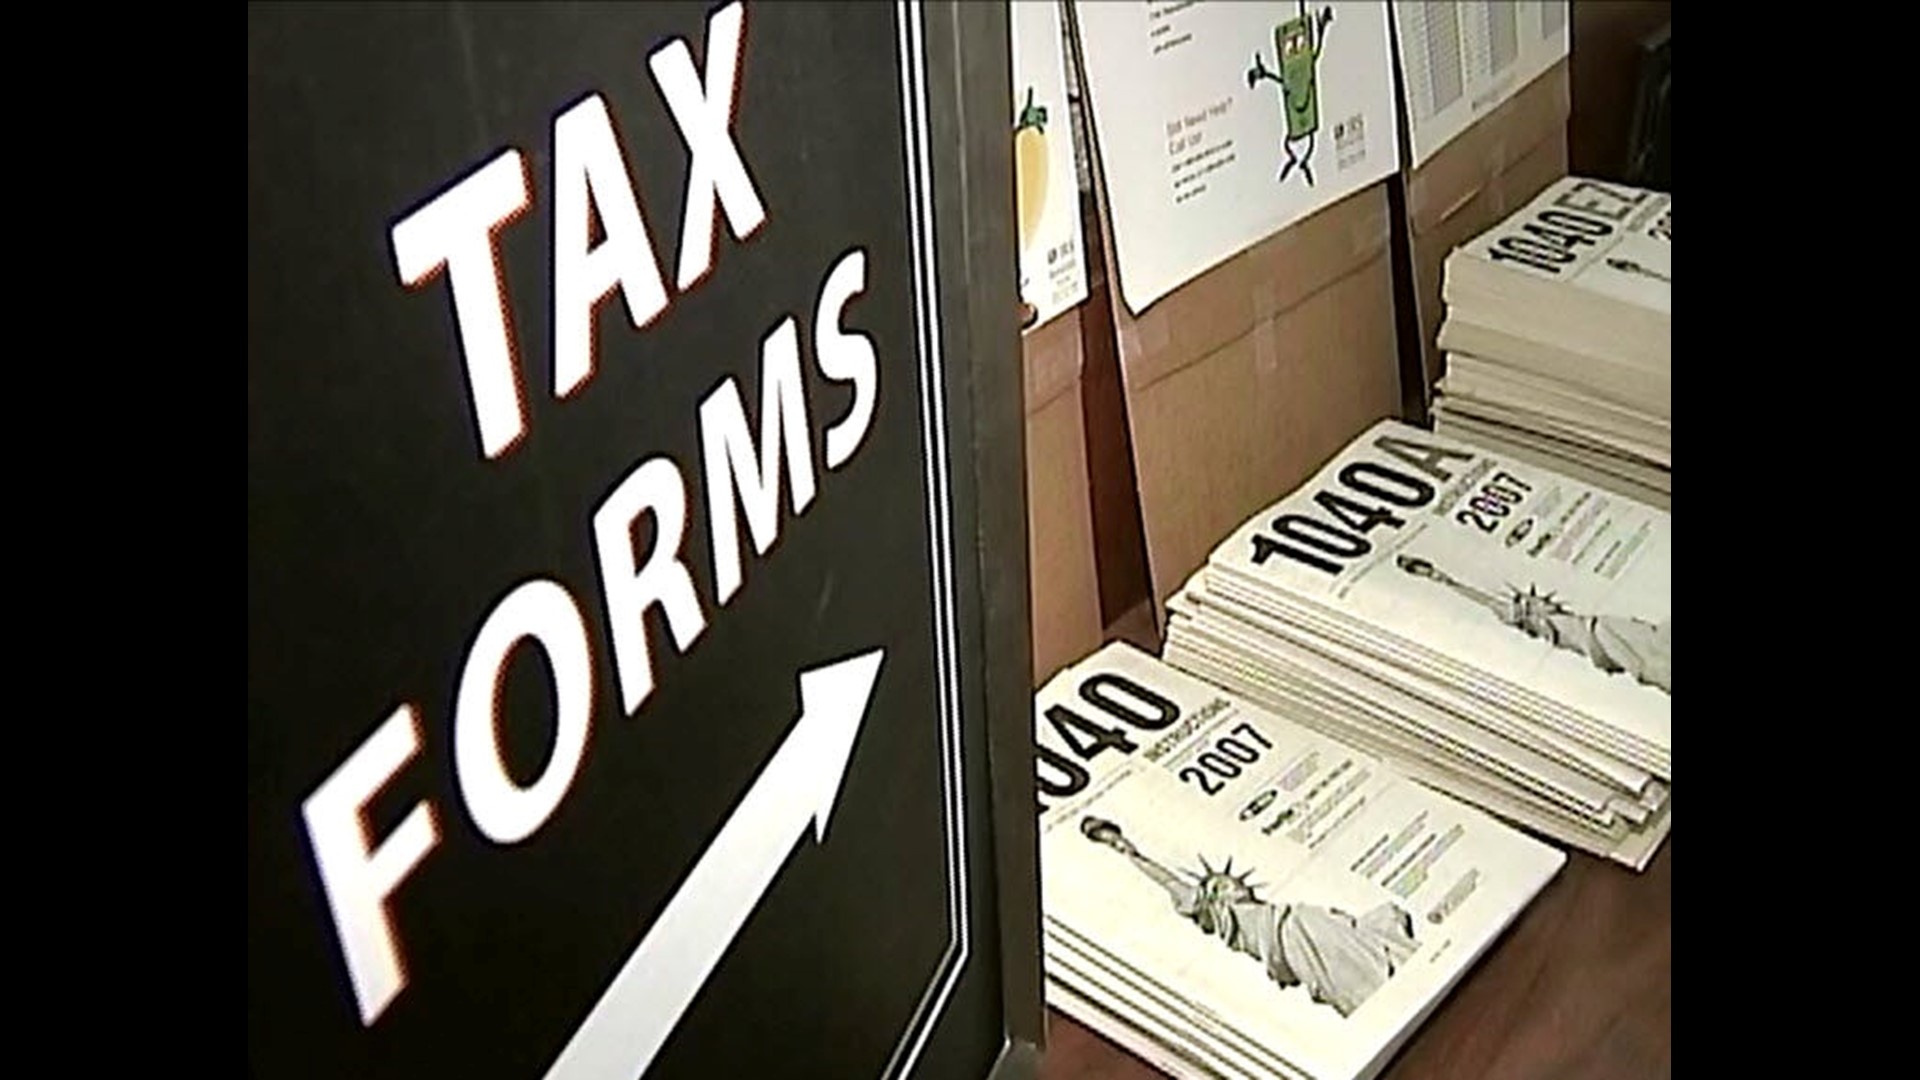 If you need help filing your taxes, the United Way is putting on multiple "Community Tax Days" this month.